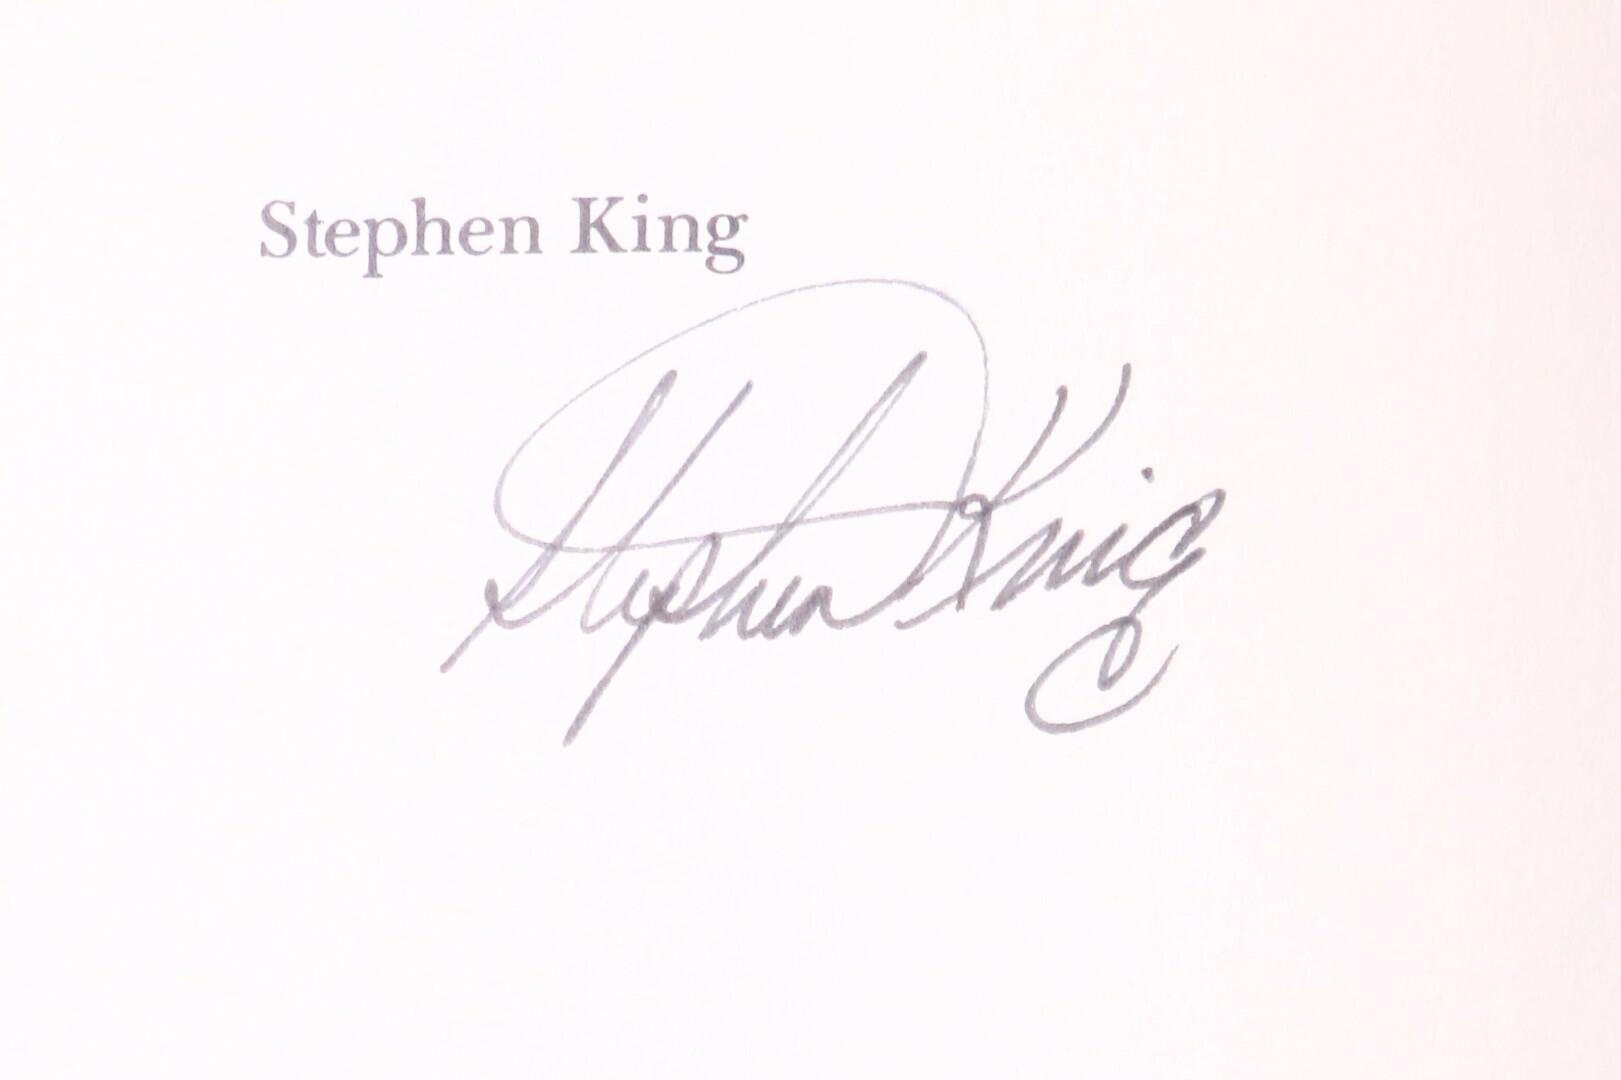 Stephen King - Christine - Donald M. Grant, 1983, Limited Edition.  Signed